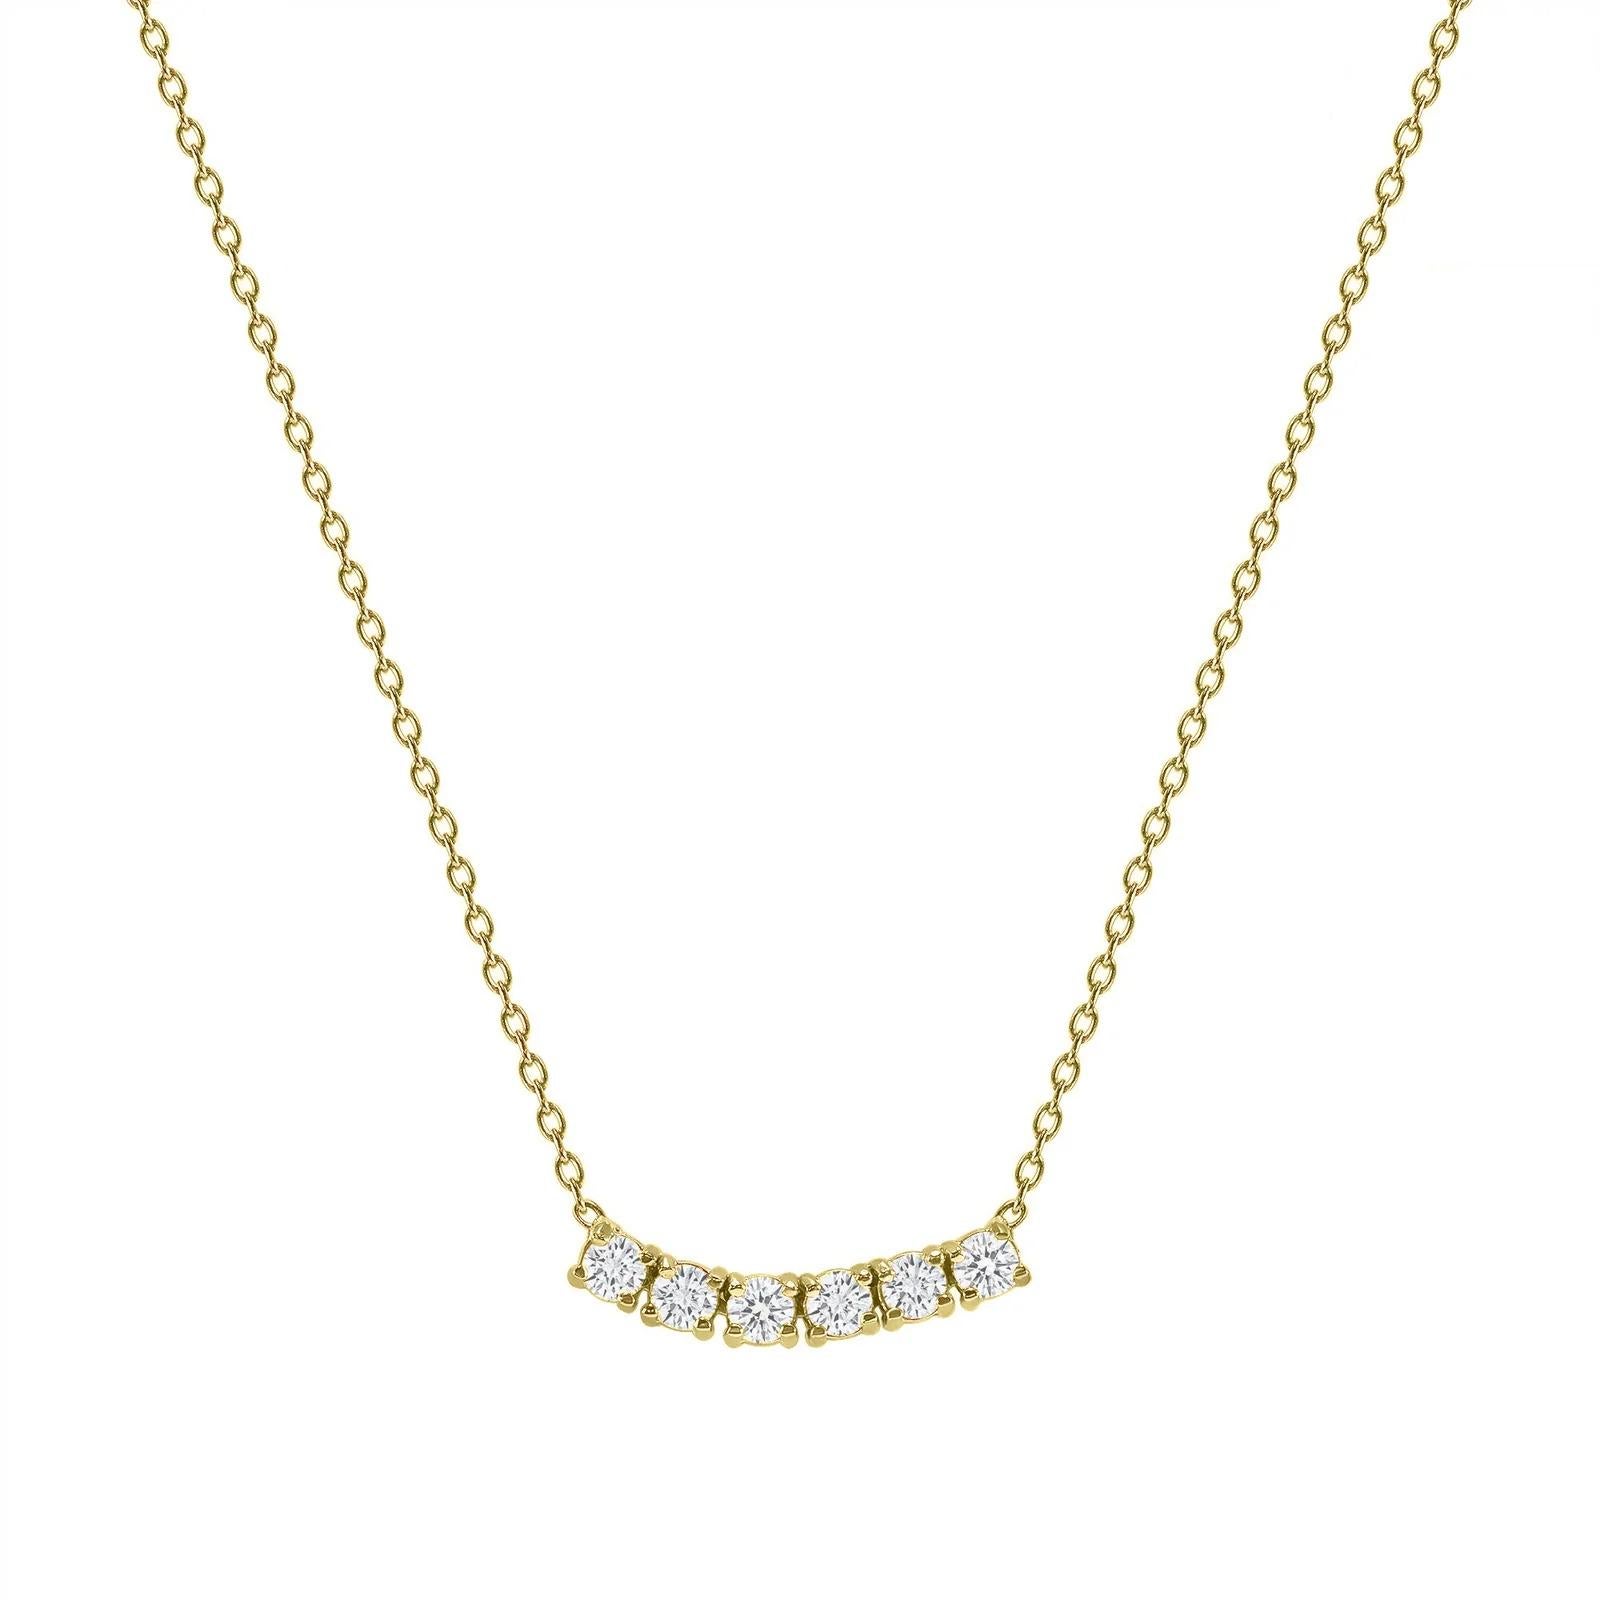 This petite, curved diamond necklace is crafted with gorgeous 14k gold set with six round diamonds.  

Gold: 14k 
Diamond Total Carats: 2 ct
Diamond Cut: Round (6 diamonds)
Diamond Clarity: VS
Diamond Color: F
Color: Yellow Gold
Necklace Length: 20